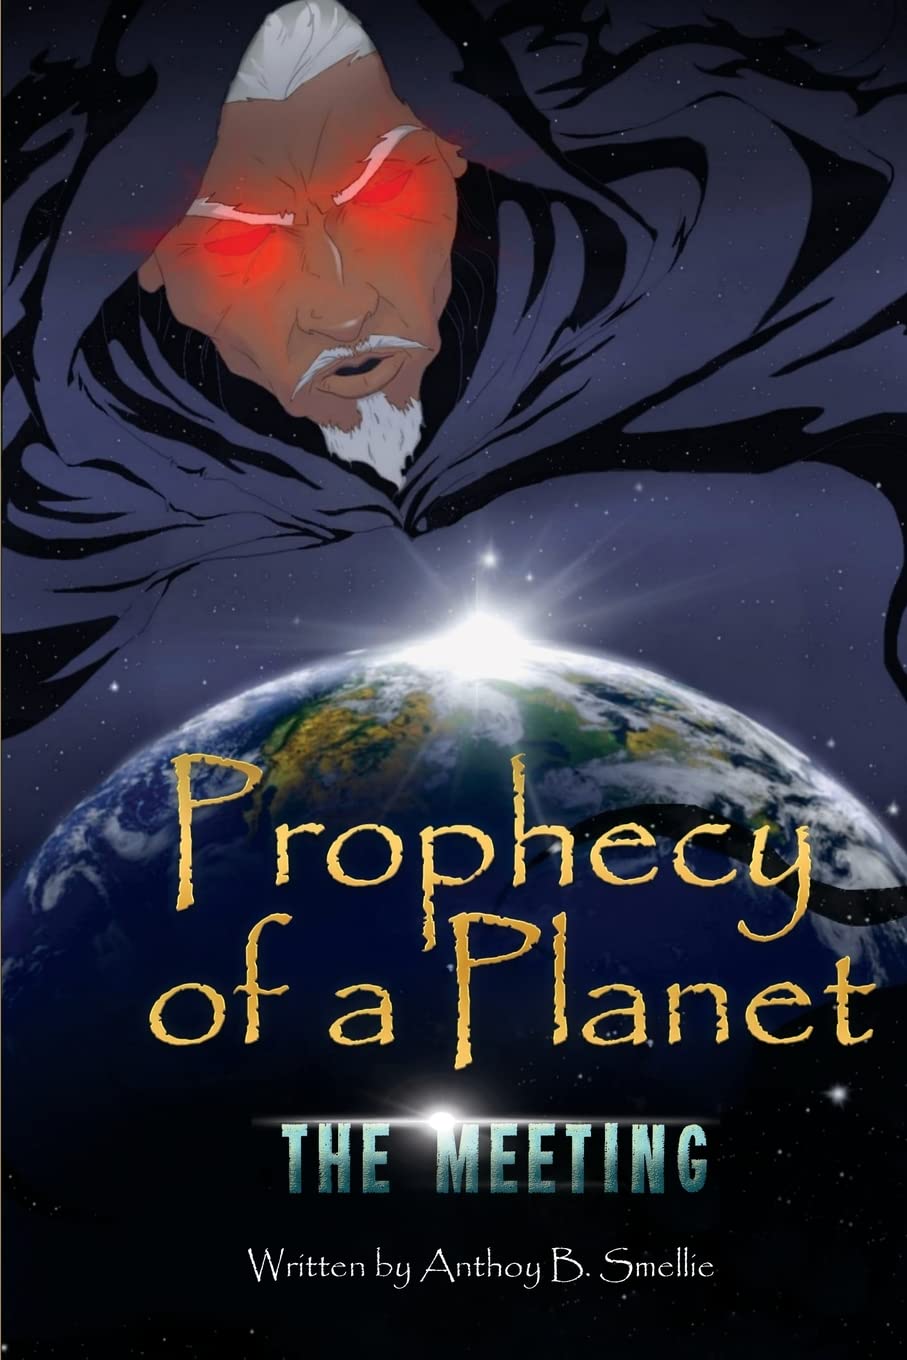 Author's Tranquility Press Promotes Anthony B. Smellie’s, The Prophecy of a Planet: The Meeting